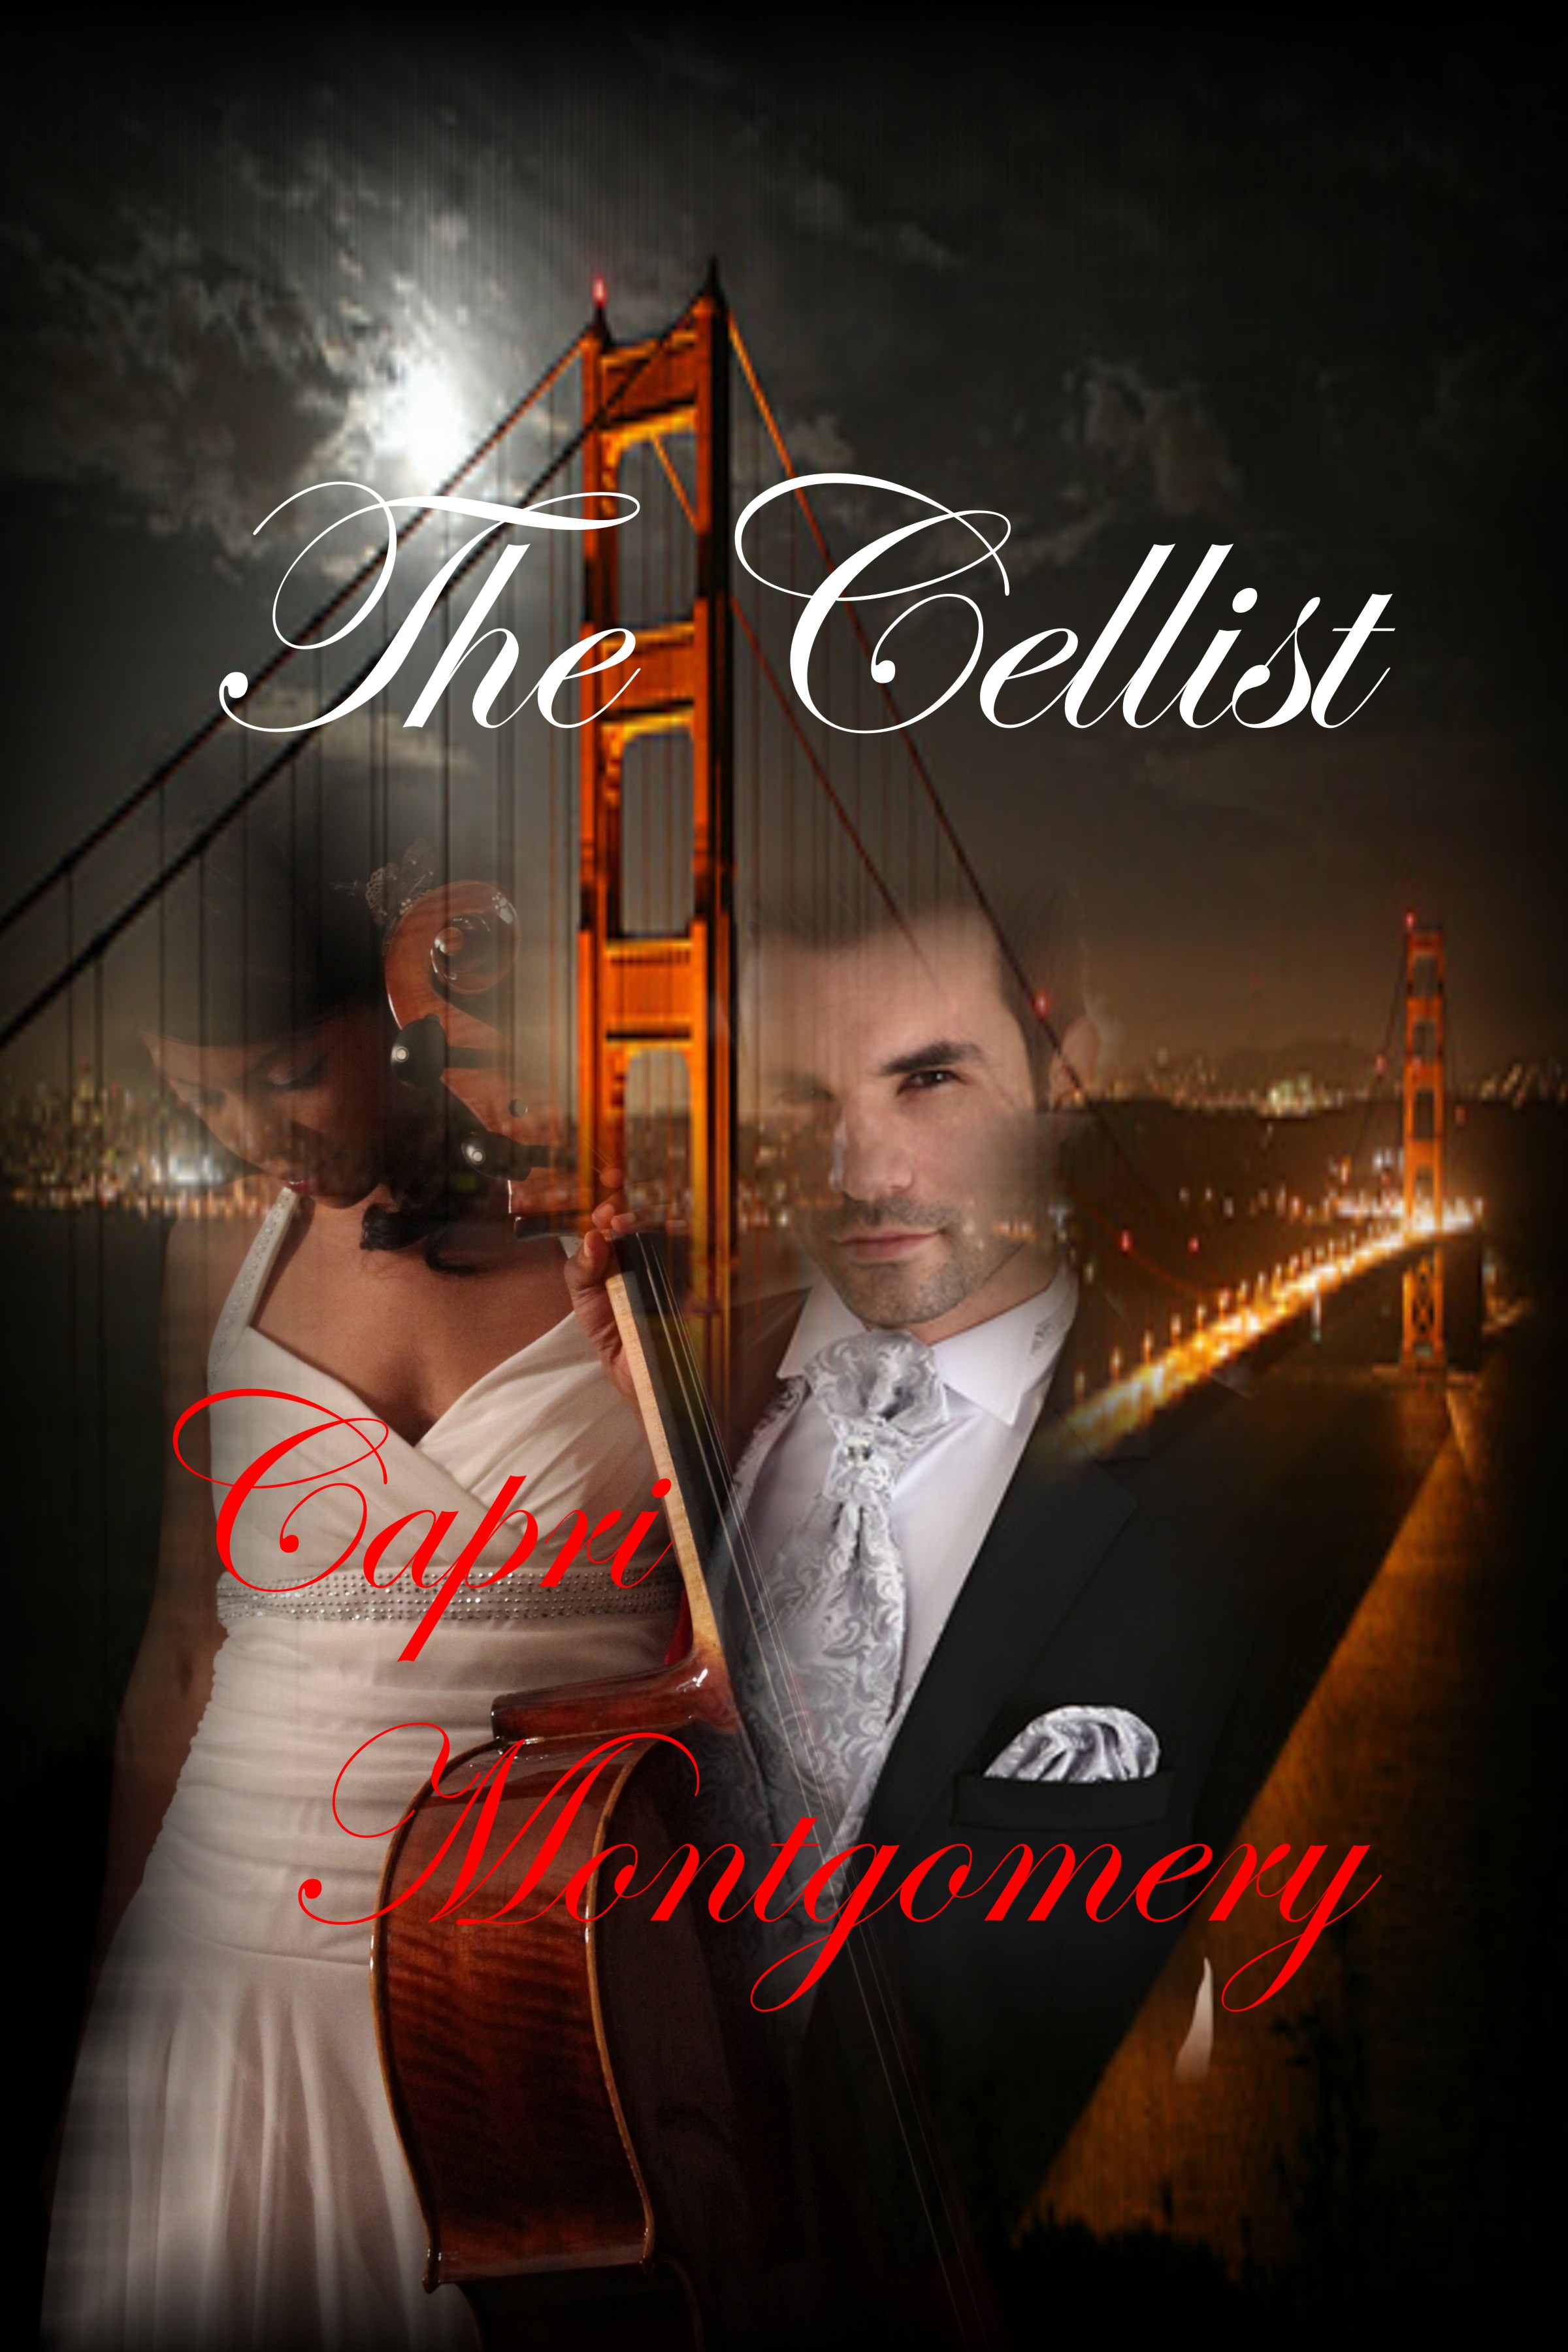 The Cellist Book Cover